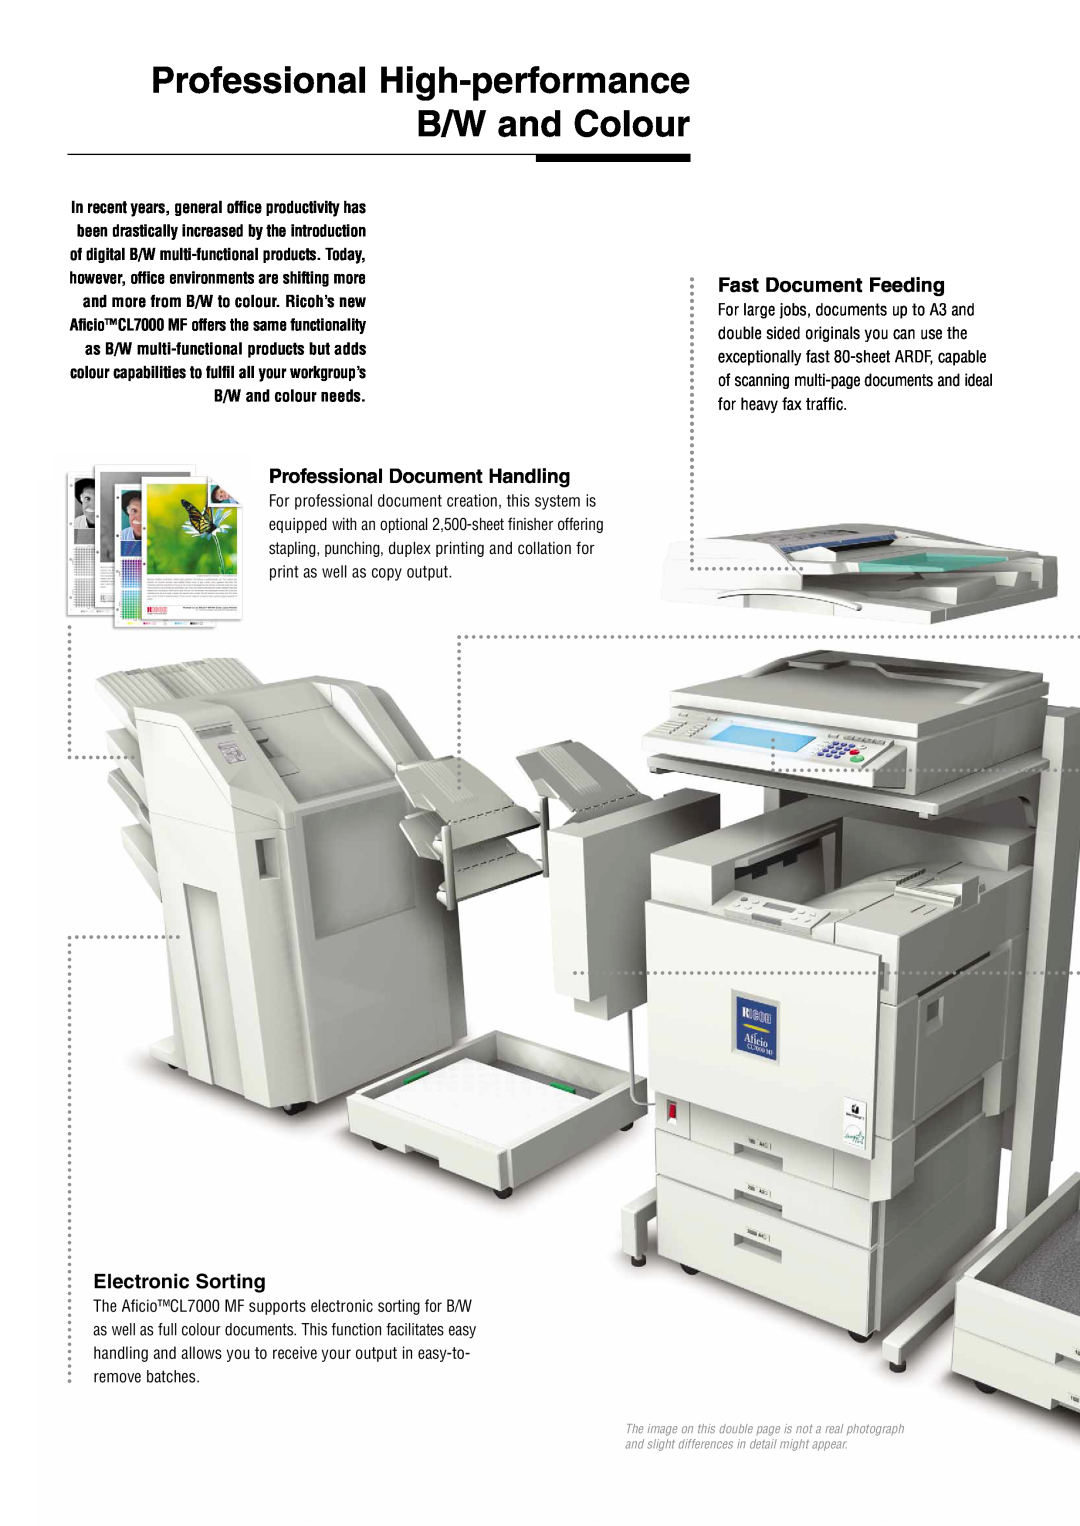 Ricoh CL7000 MF manual Professional High-performance B/W and Colour, Professional Document Handling, Electronic Sorting 